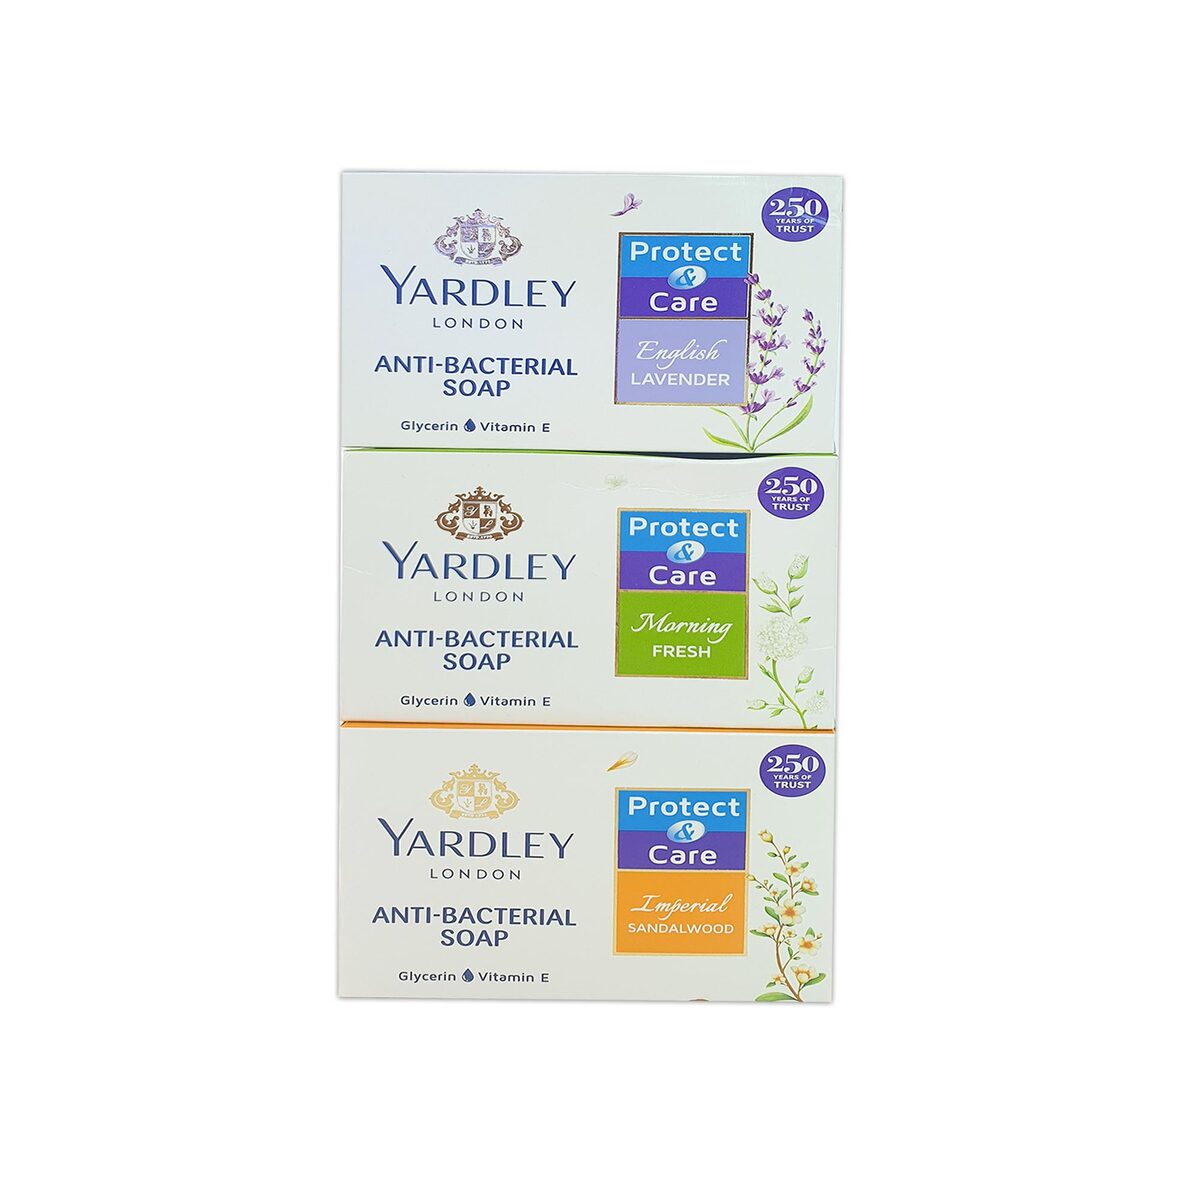 Yardley London Anti-Bacterial Soap Assorted Value Pack 6 x 100g